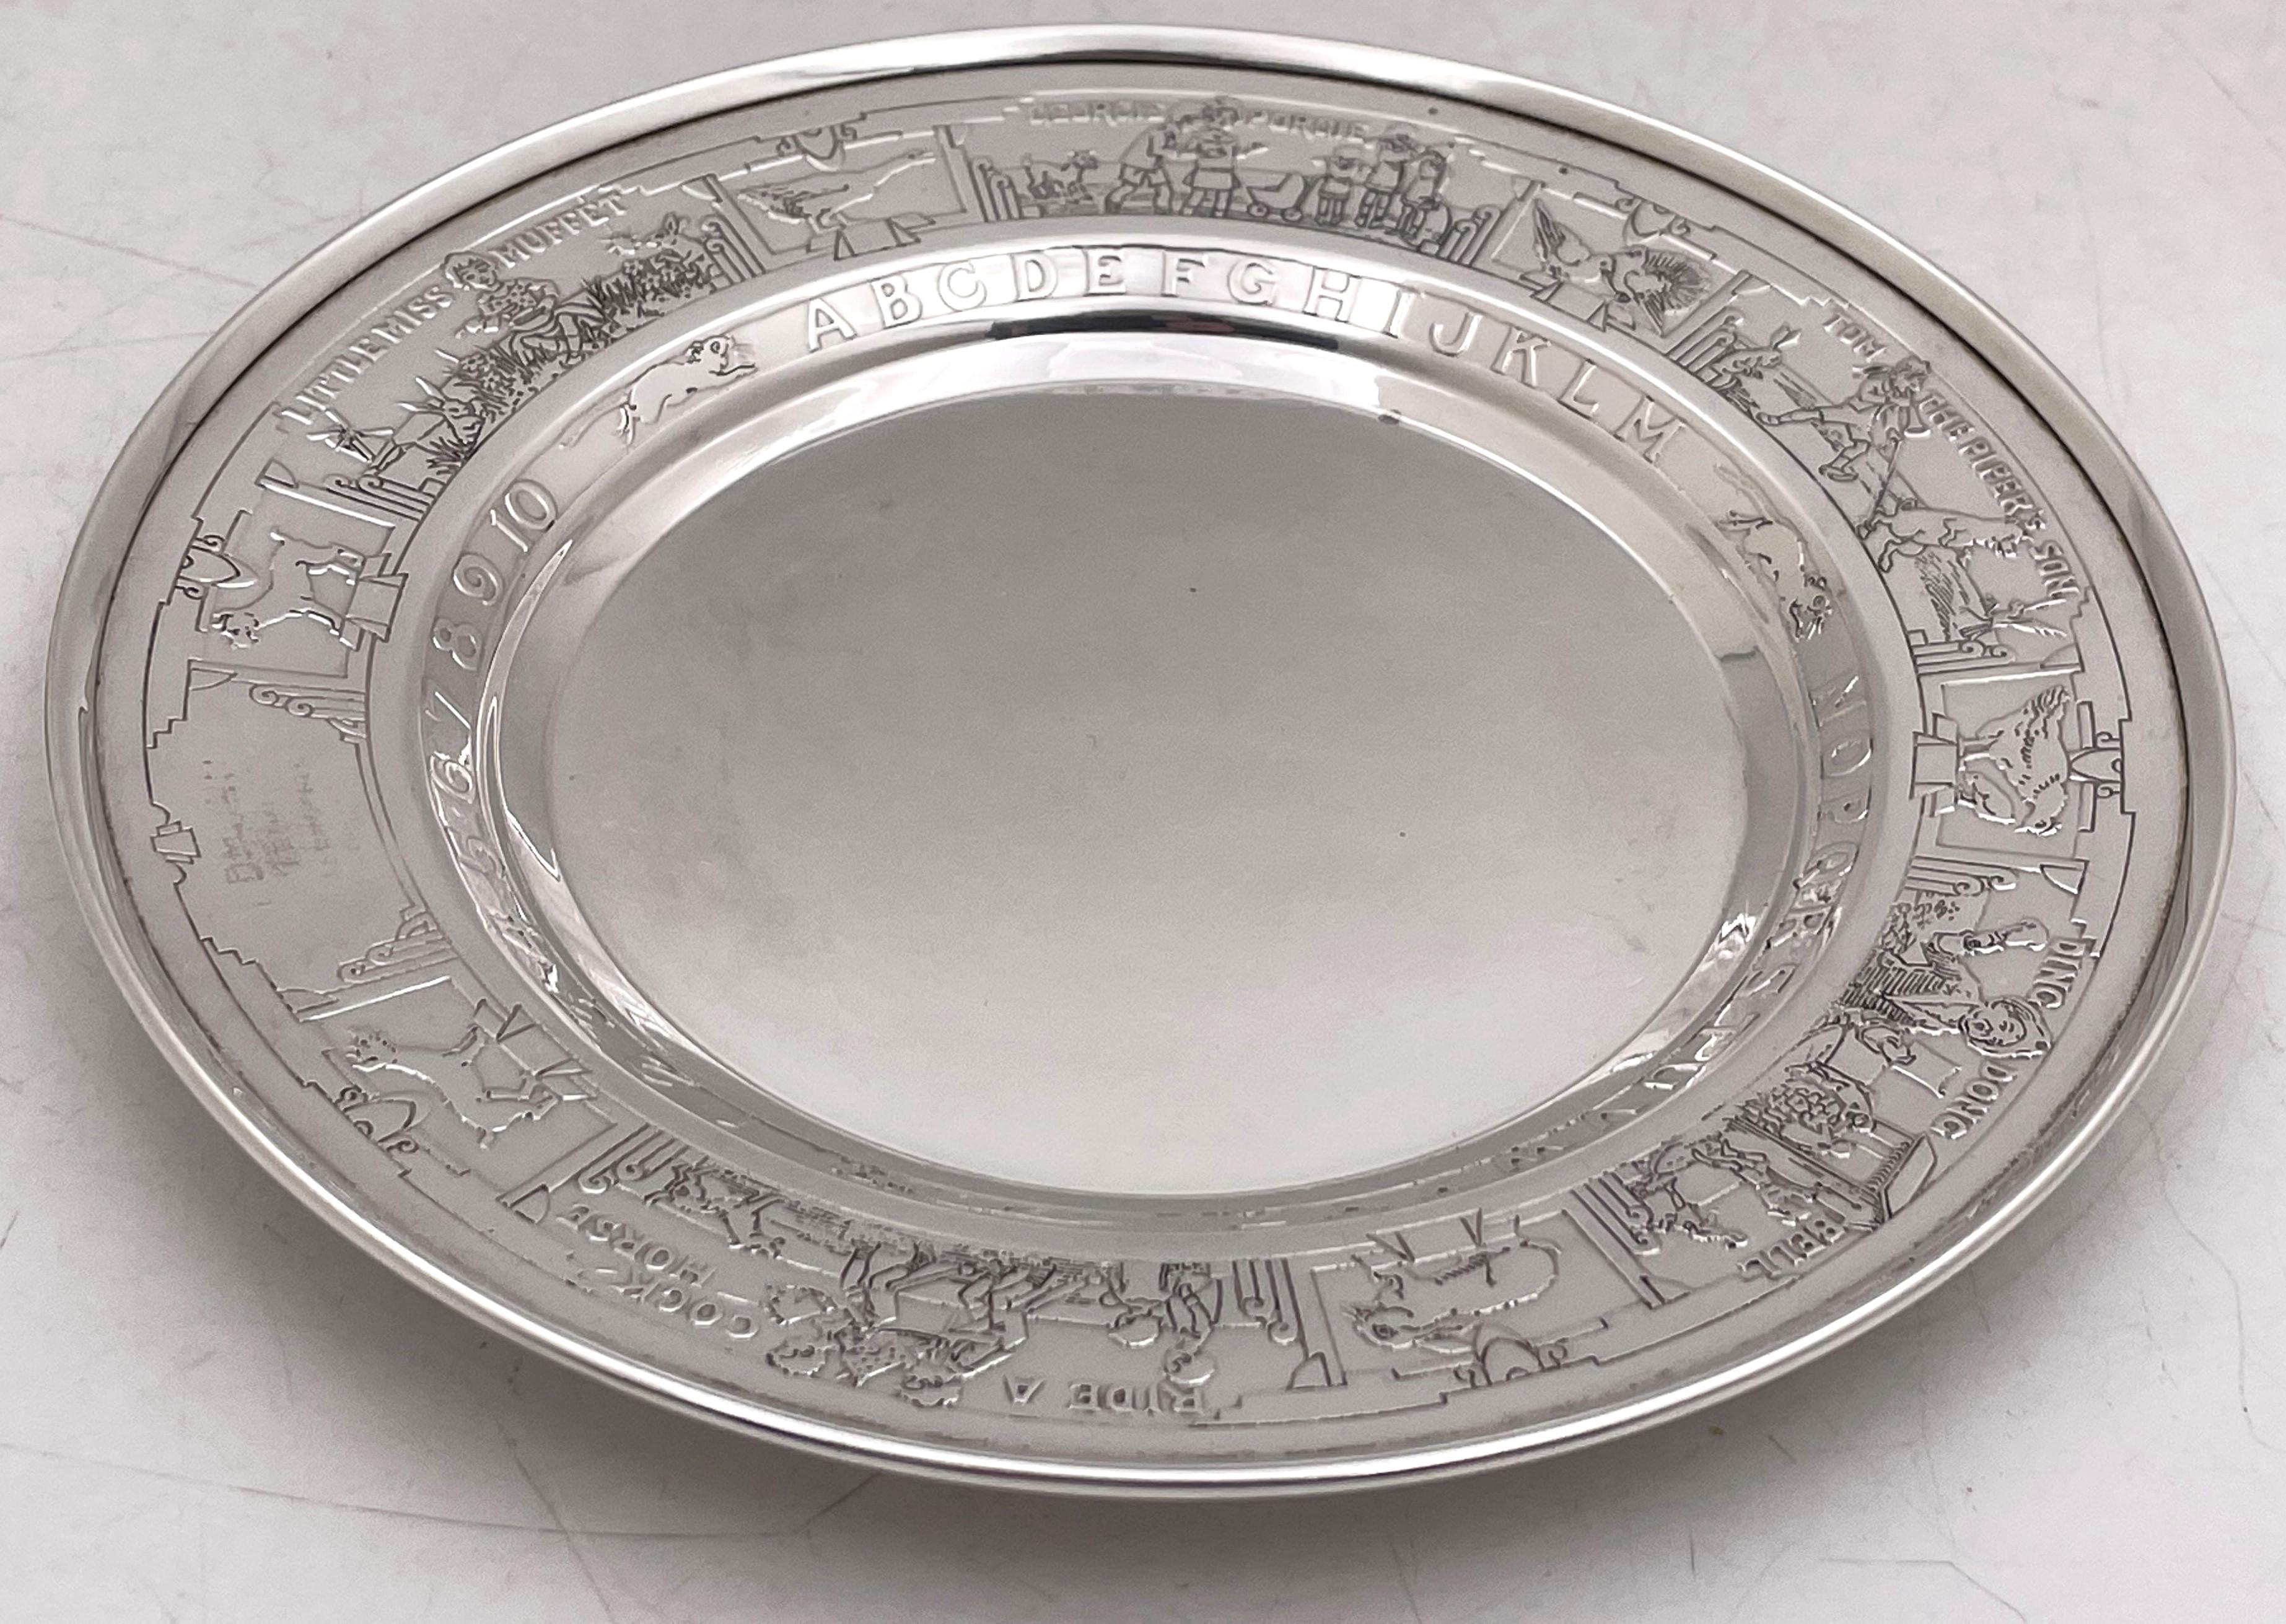 Gorham sterling silver child bowl and underplate from the 20th century, beautifully acid etched with children's stories including Little Red Riding Hood, Little Miss Muffet, and Puss in Boots, as well as animals, numbers, and the letters of the